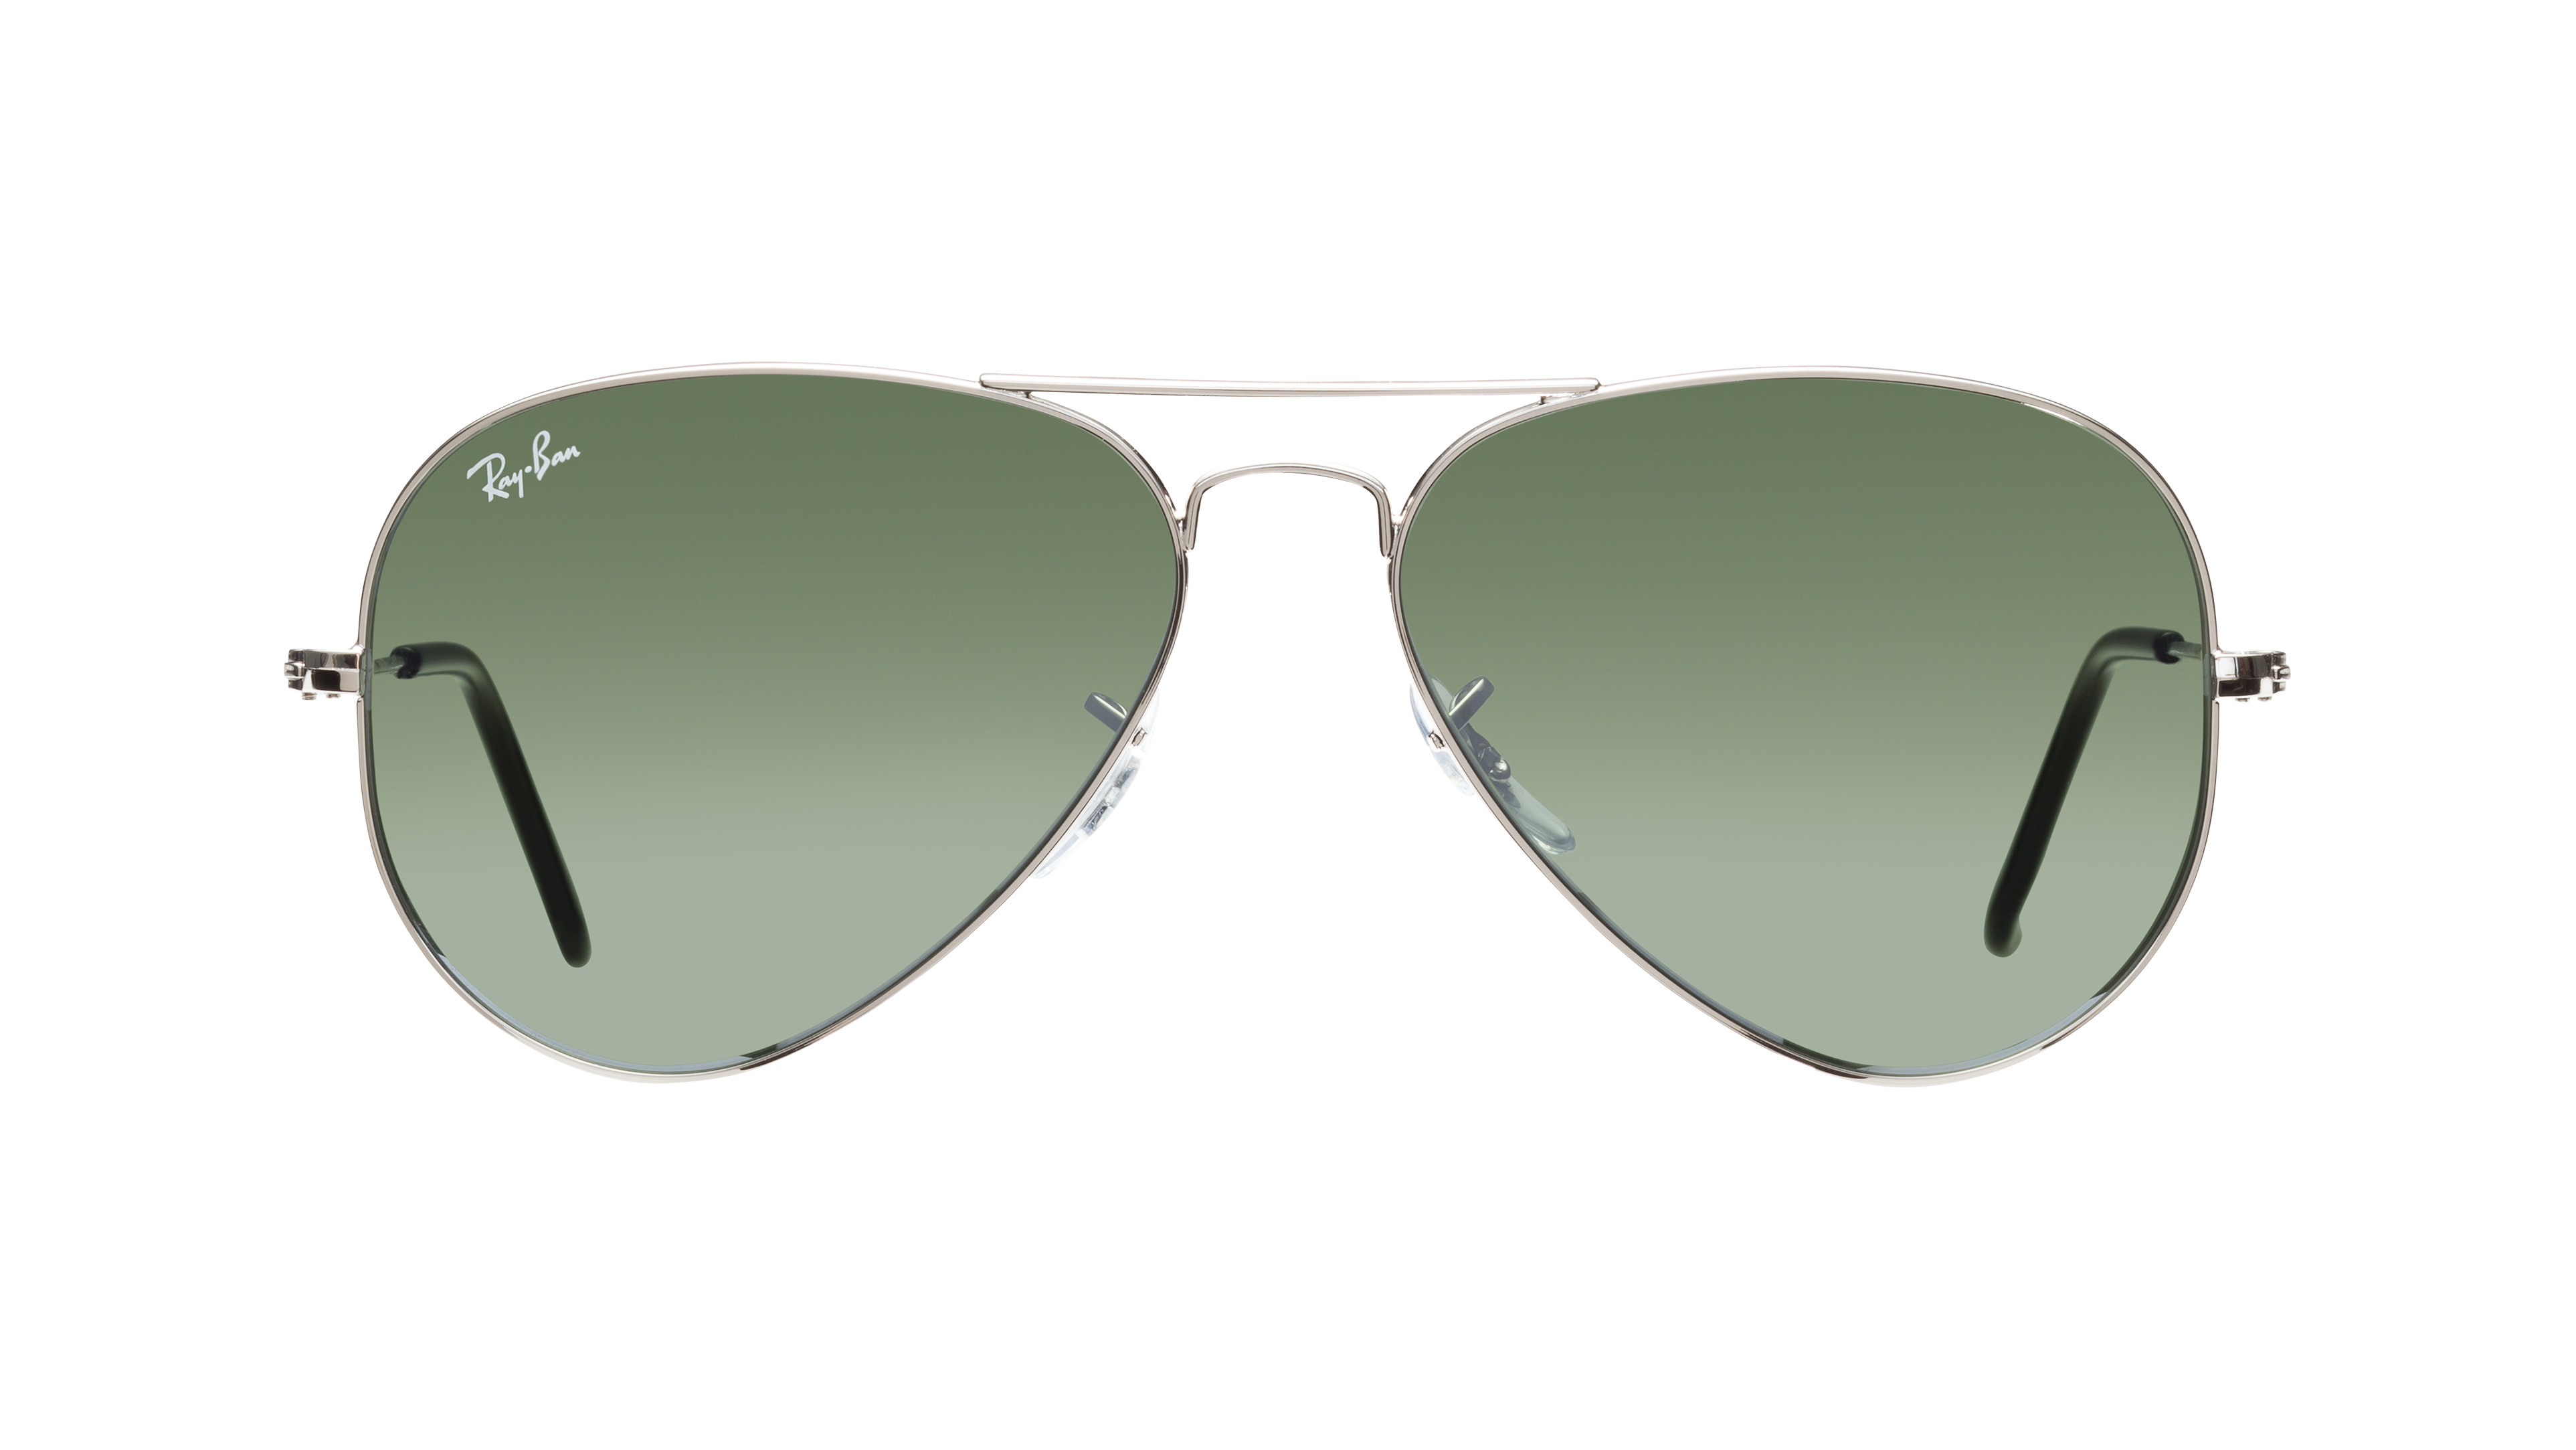 [products.image.front] Ray-Ban AVIATOR LARGE METAL 0RB3025 W3277 Sonnenbrille